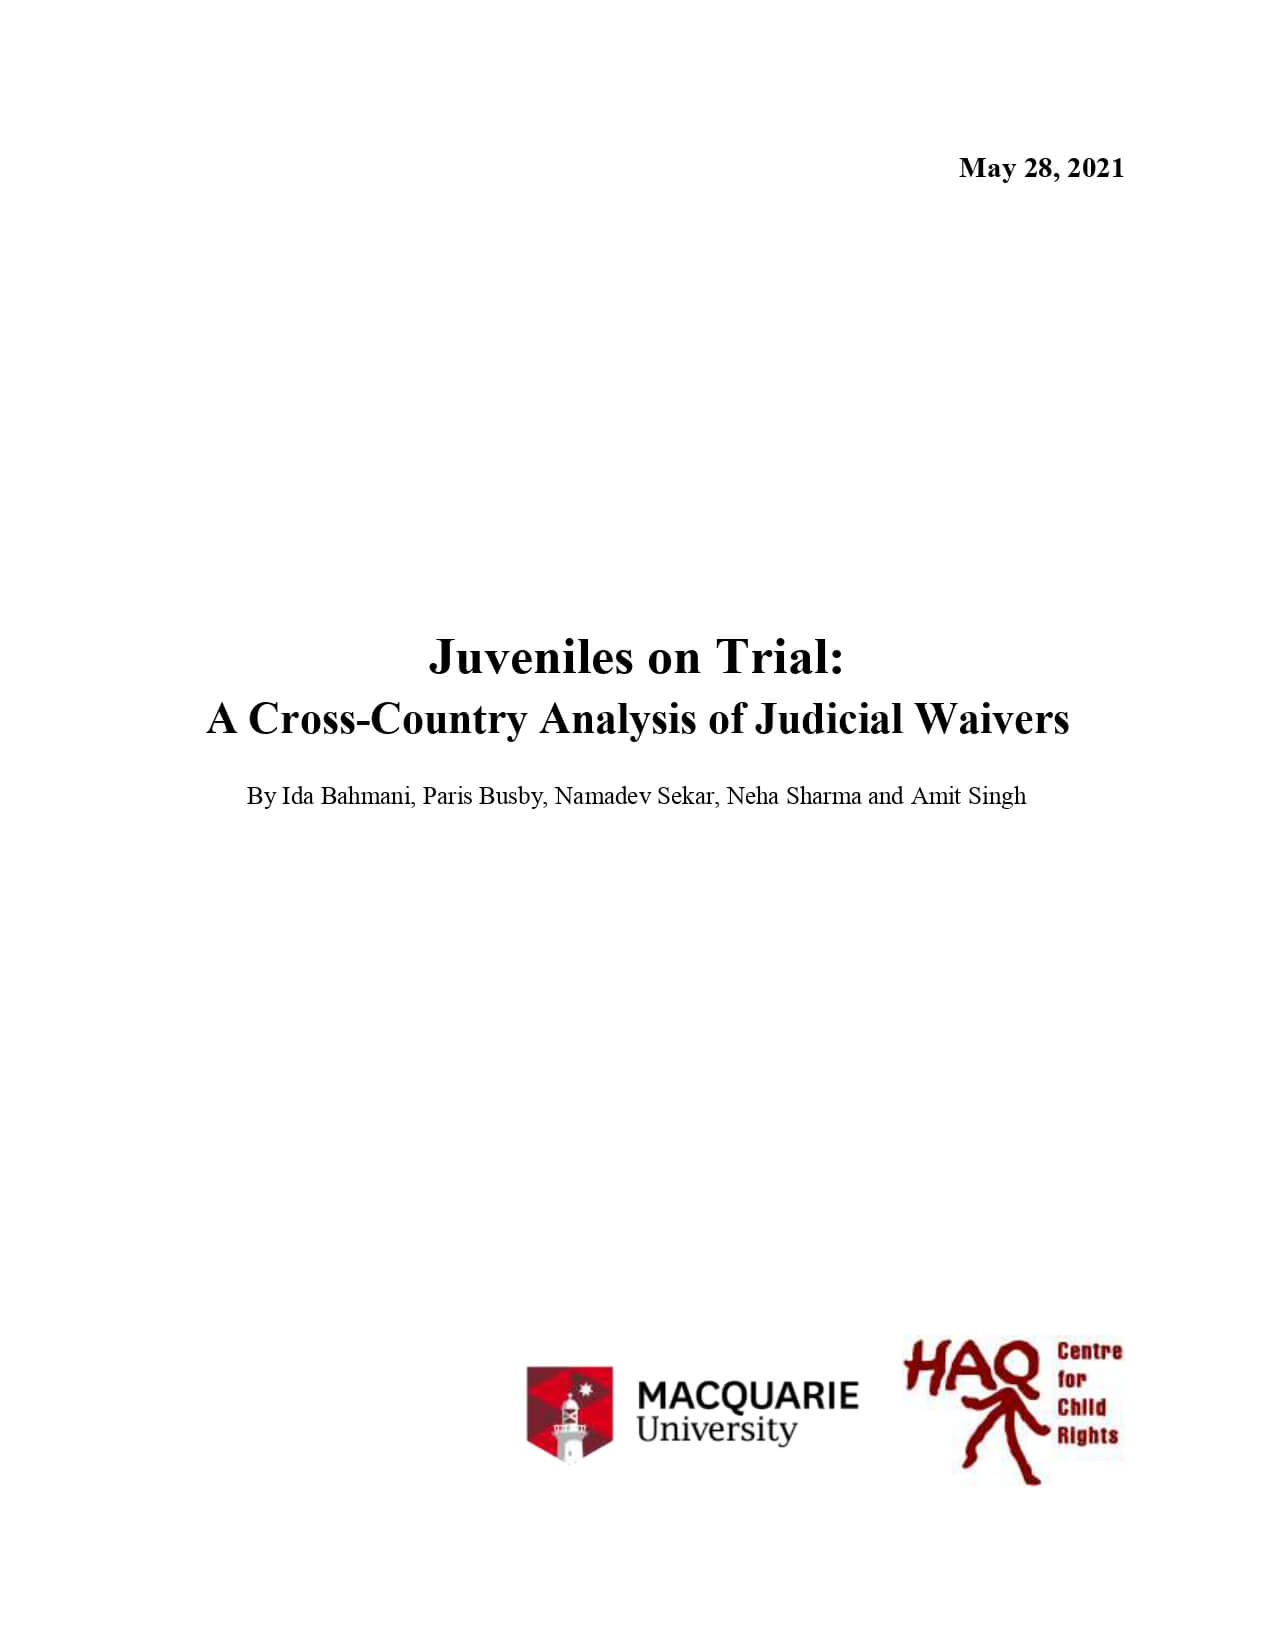 Juveniles on Trial: A Cross-Country Analysis of Judicial Waivers